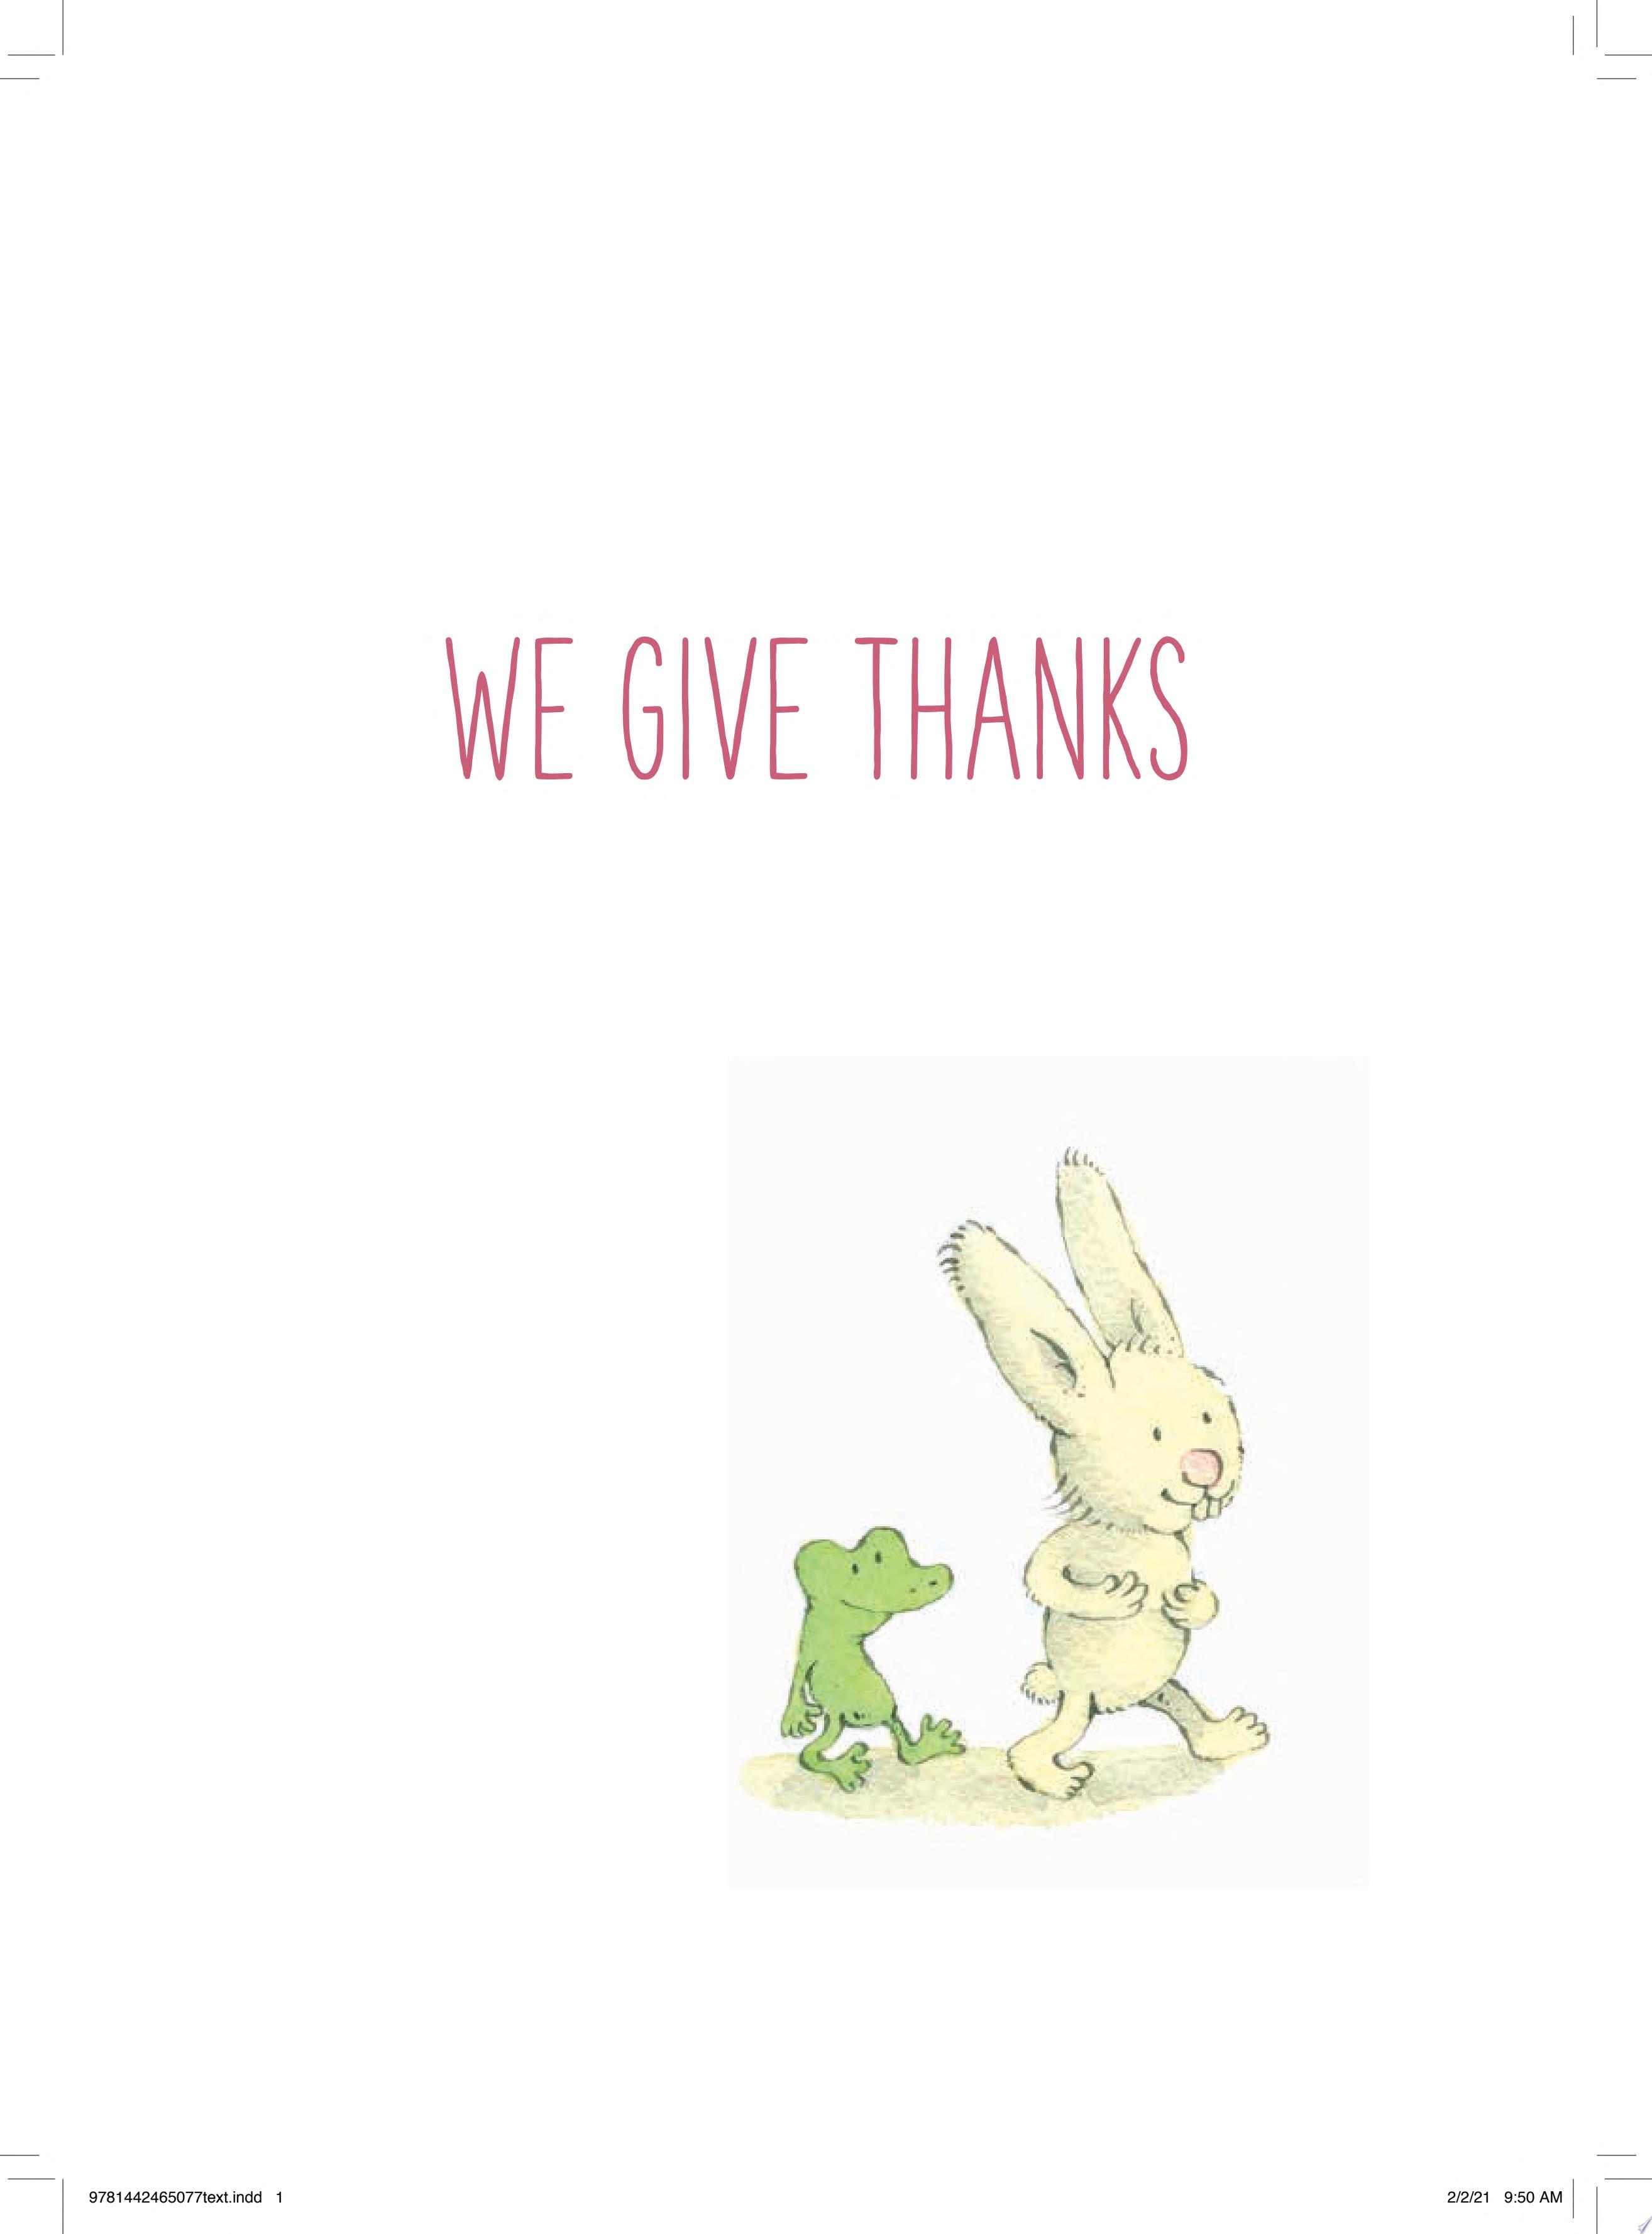 Image for "We Give Thanks"